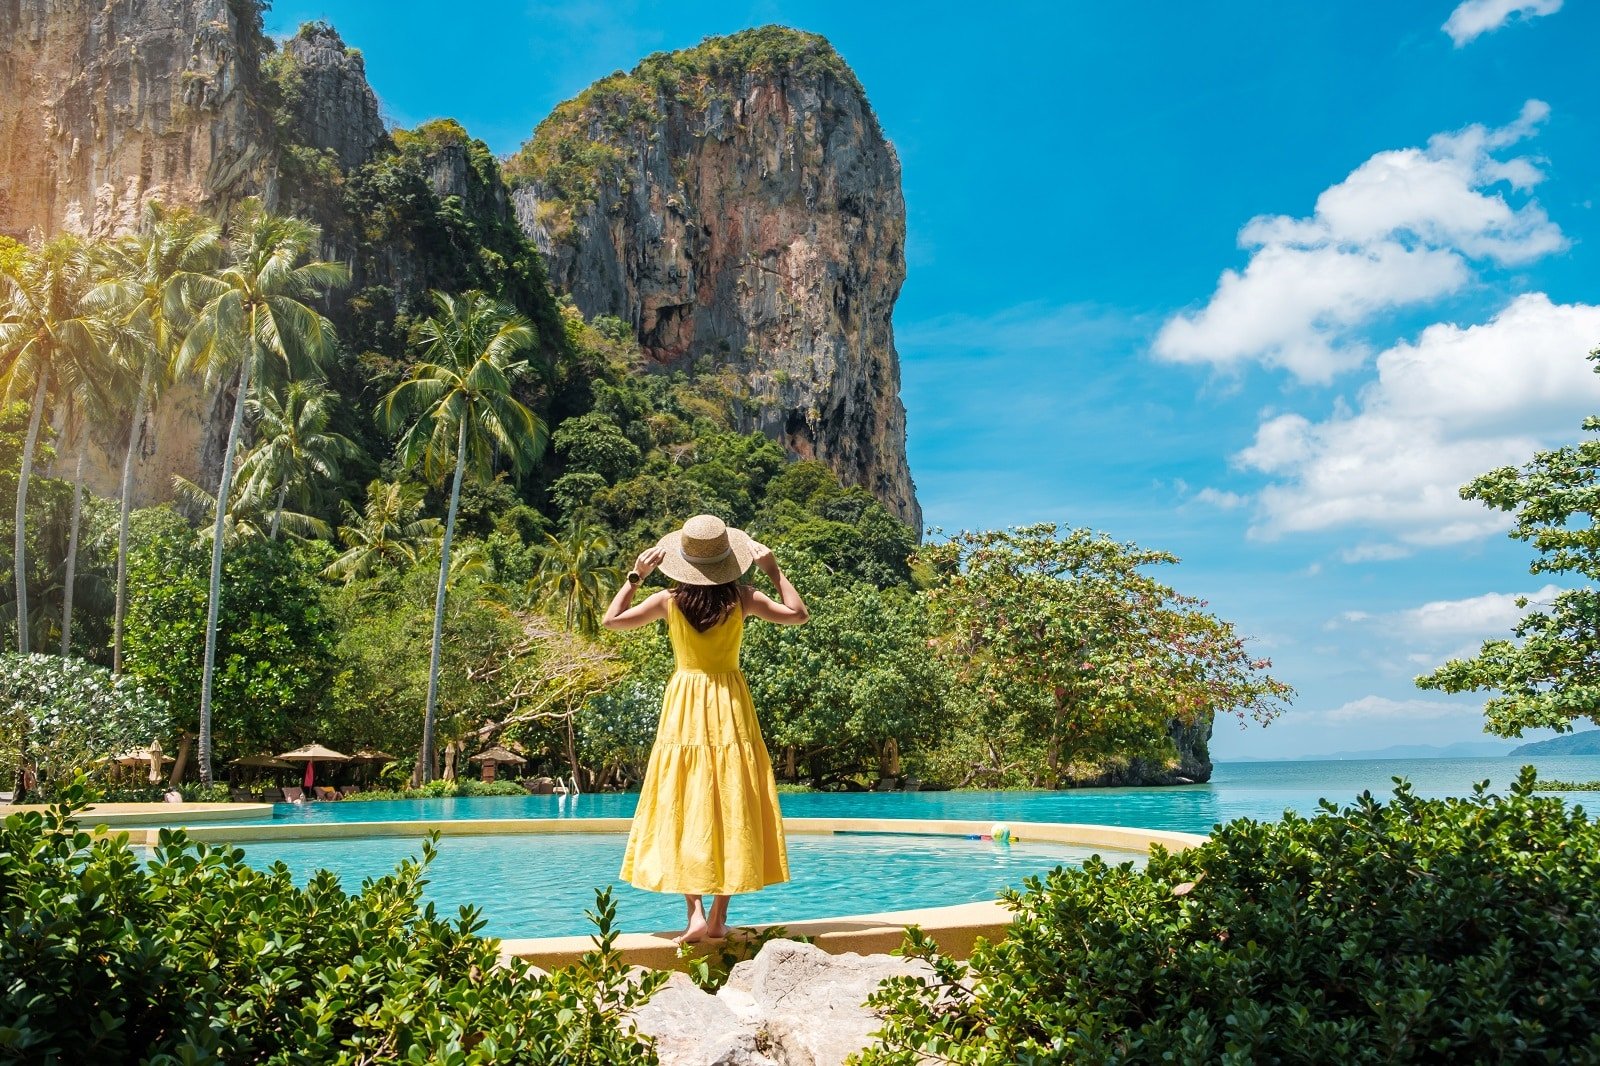 <p><span>Soneva Kiri in Thailand offers eco-friendly luxury on one of the country’s best beaches. The resort’s pool villas, sustainable practices, and The Den for kids ensure a memorable family vacation. Discover local culture, enjoy gourmet dining, and relax in nature.</span></p> <p><b>Insider’s Tip: </b><span>Visit Ao Salat fishing village for a glimpse into local life.</span></p> <p><b>Best Time to Visit: </b><span>November to April for the best beach weather.</span></p>